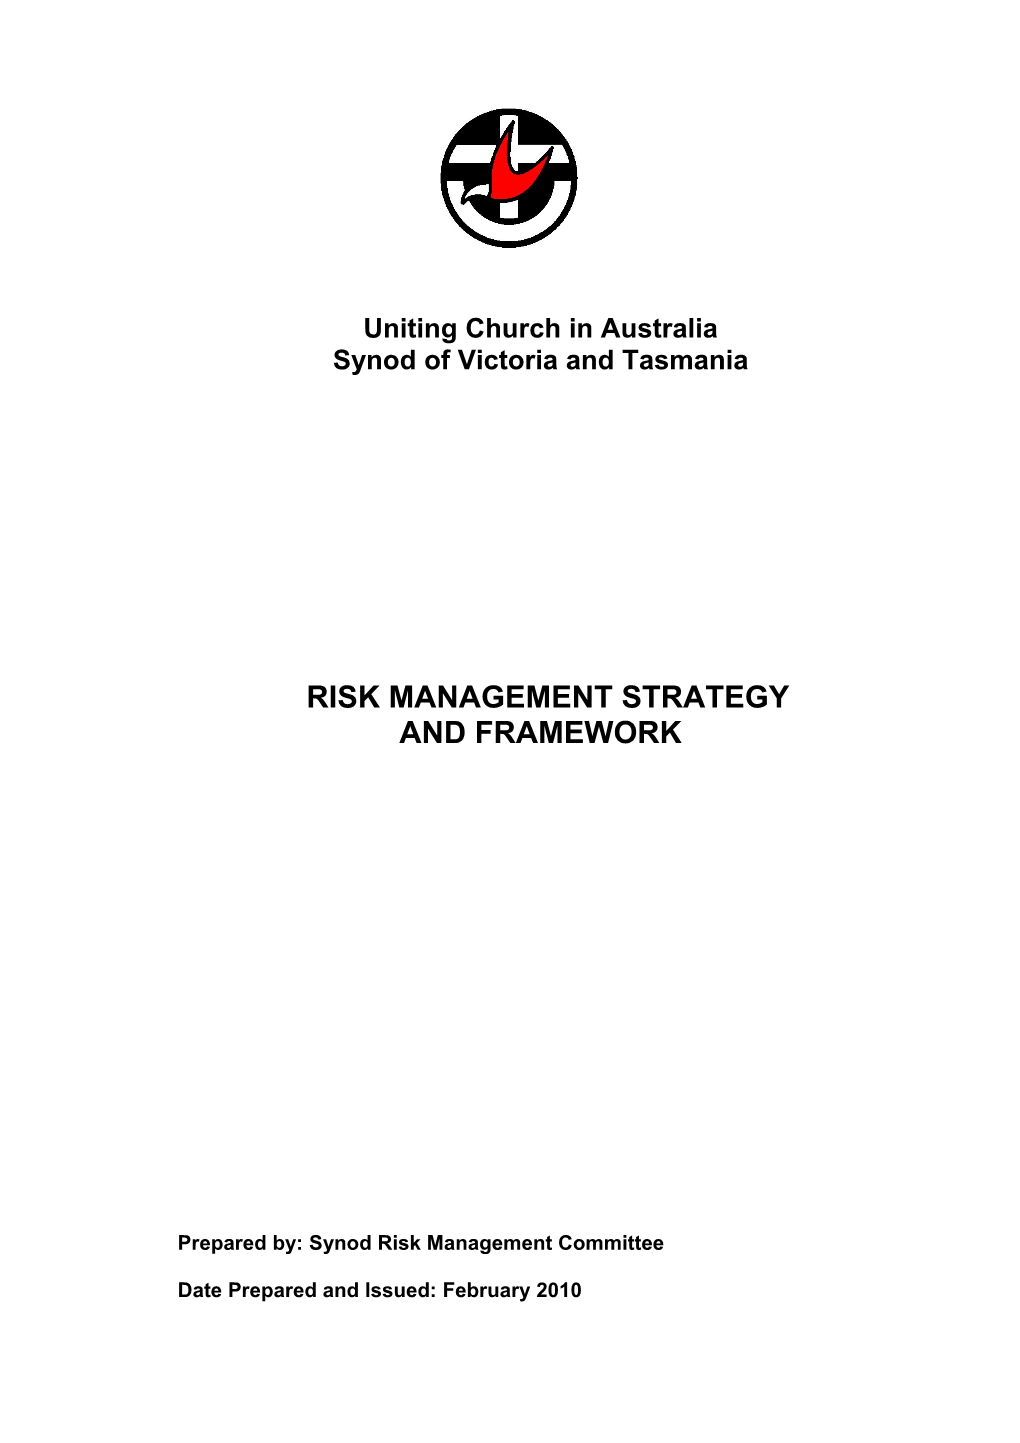 Synod Risk Management Strategy and Framework Issued Feb 2010